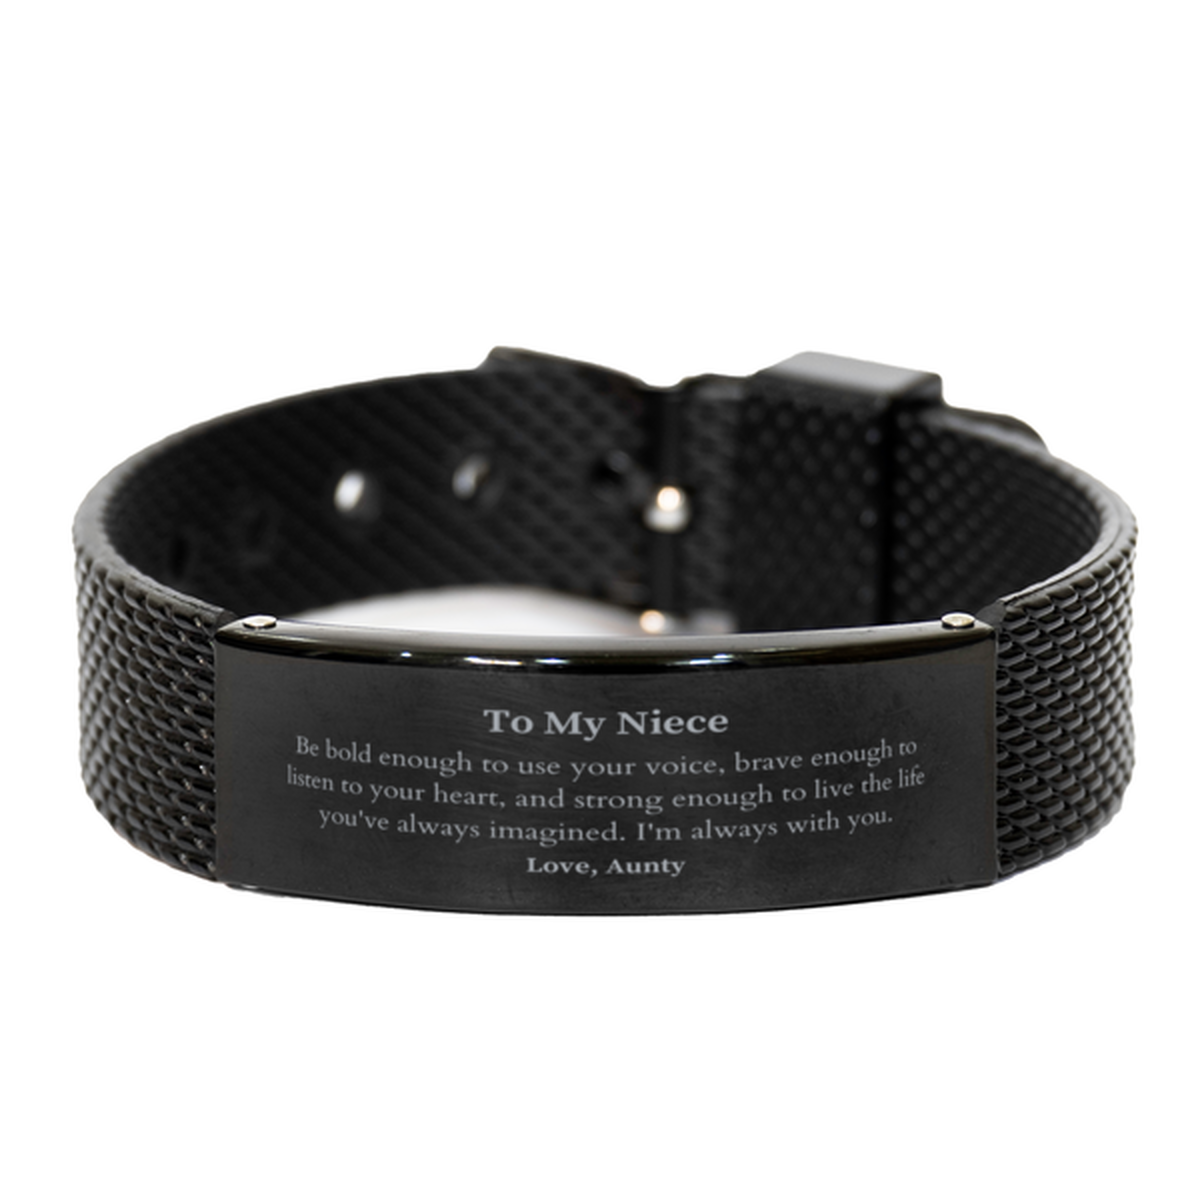 Keepsake Niece Black Shark Mesh Bracelet Gift Idea Graduation Christmas Birthday Niece from Aunty, Niece Be bold enough to use your voice, brave enough to listen to your heart. Love, Aunty